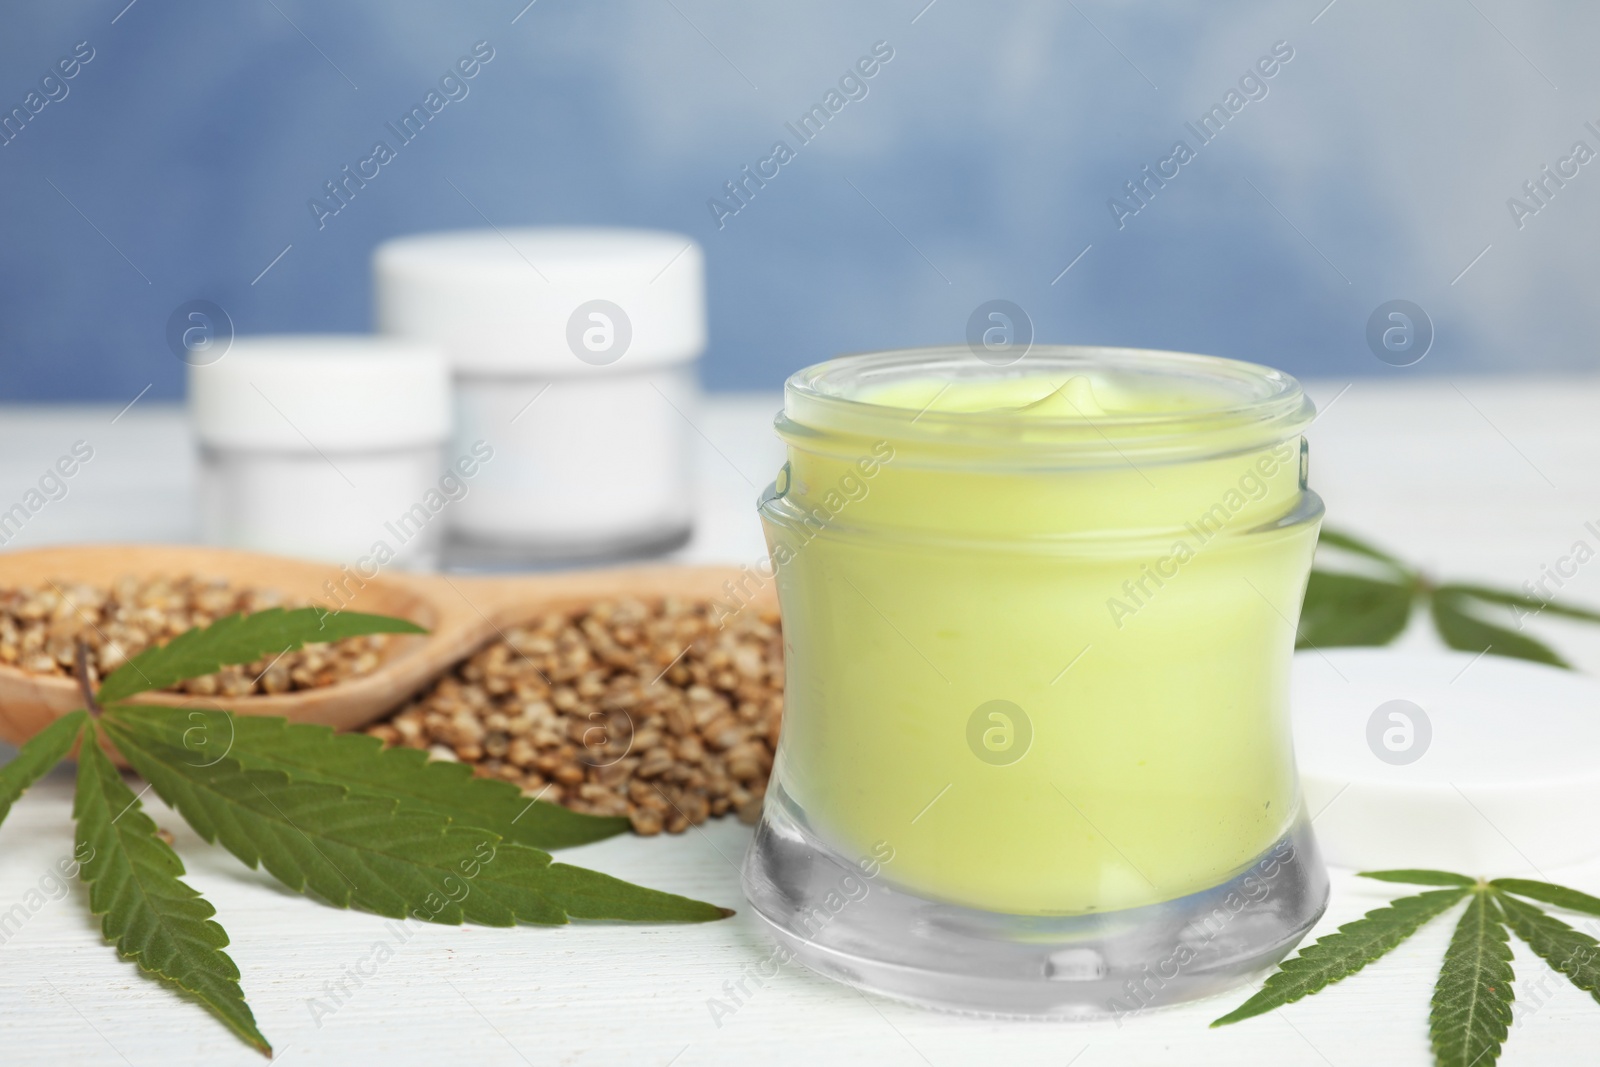 Photo of Jar of hemp cream and seeds on white wooden table against blue background, closeup. Organic cosmetics